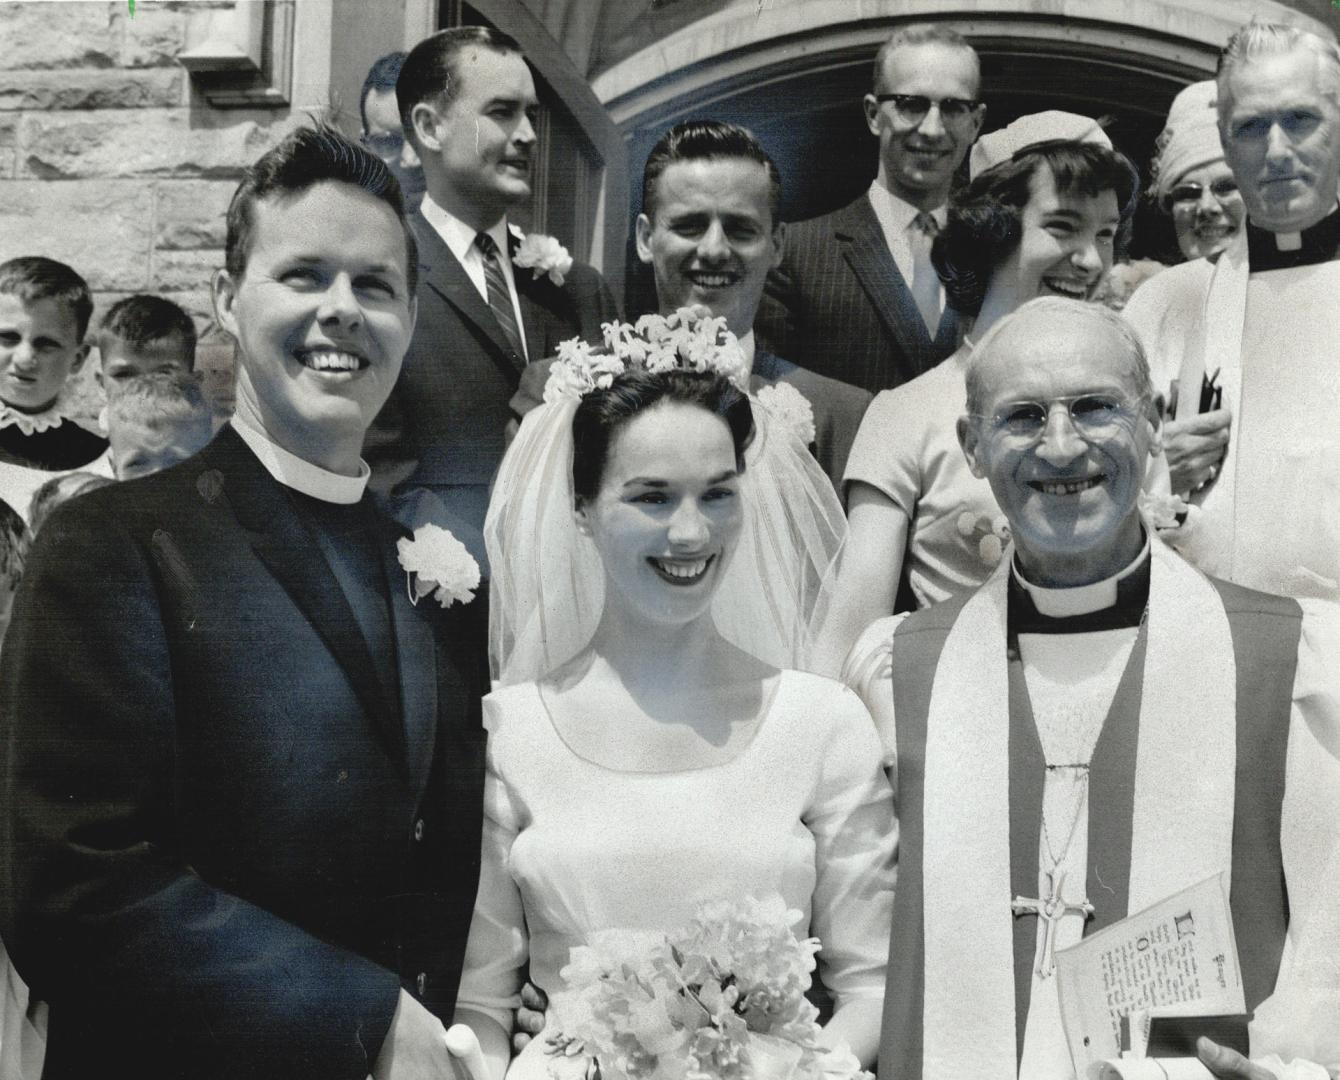 Rev. and Mrs. Philip Rowswell leave St. Timothy's Anglican Church with the bride's father Rt. Rev. H.H. Marsh, bishop of Yukon, who officiated at cere(...)